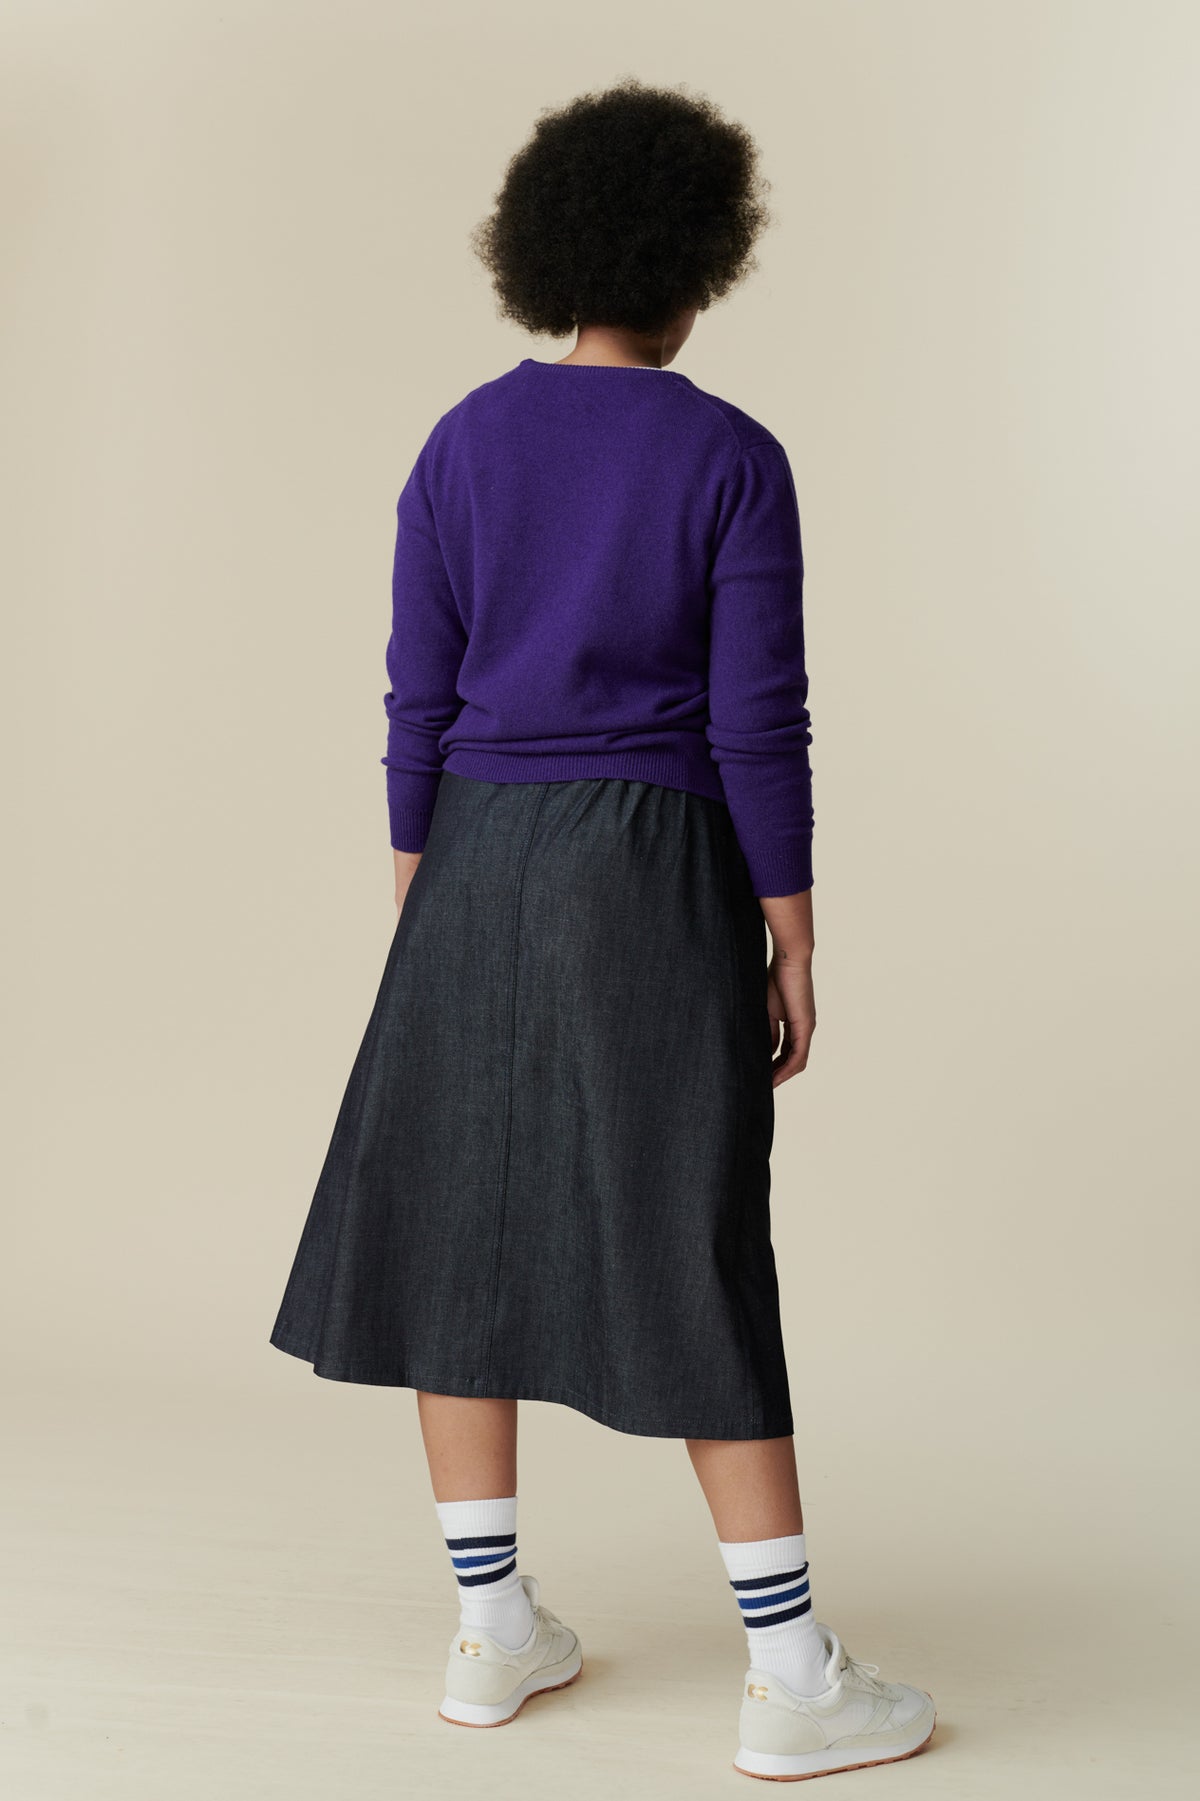 
            The back of female wearing midi skirt in denim paired with lambswool jumper in purple